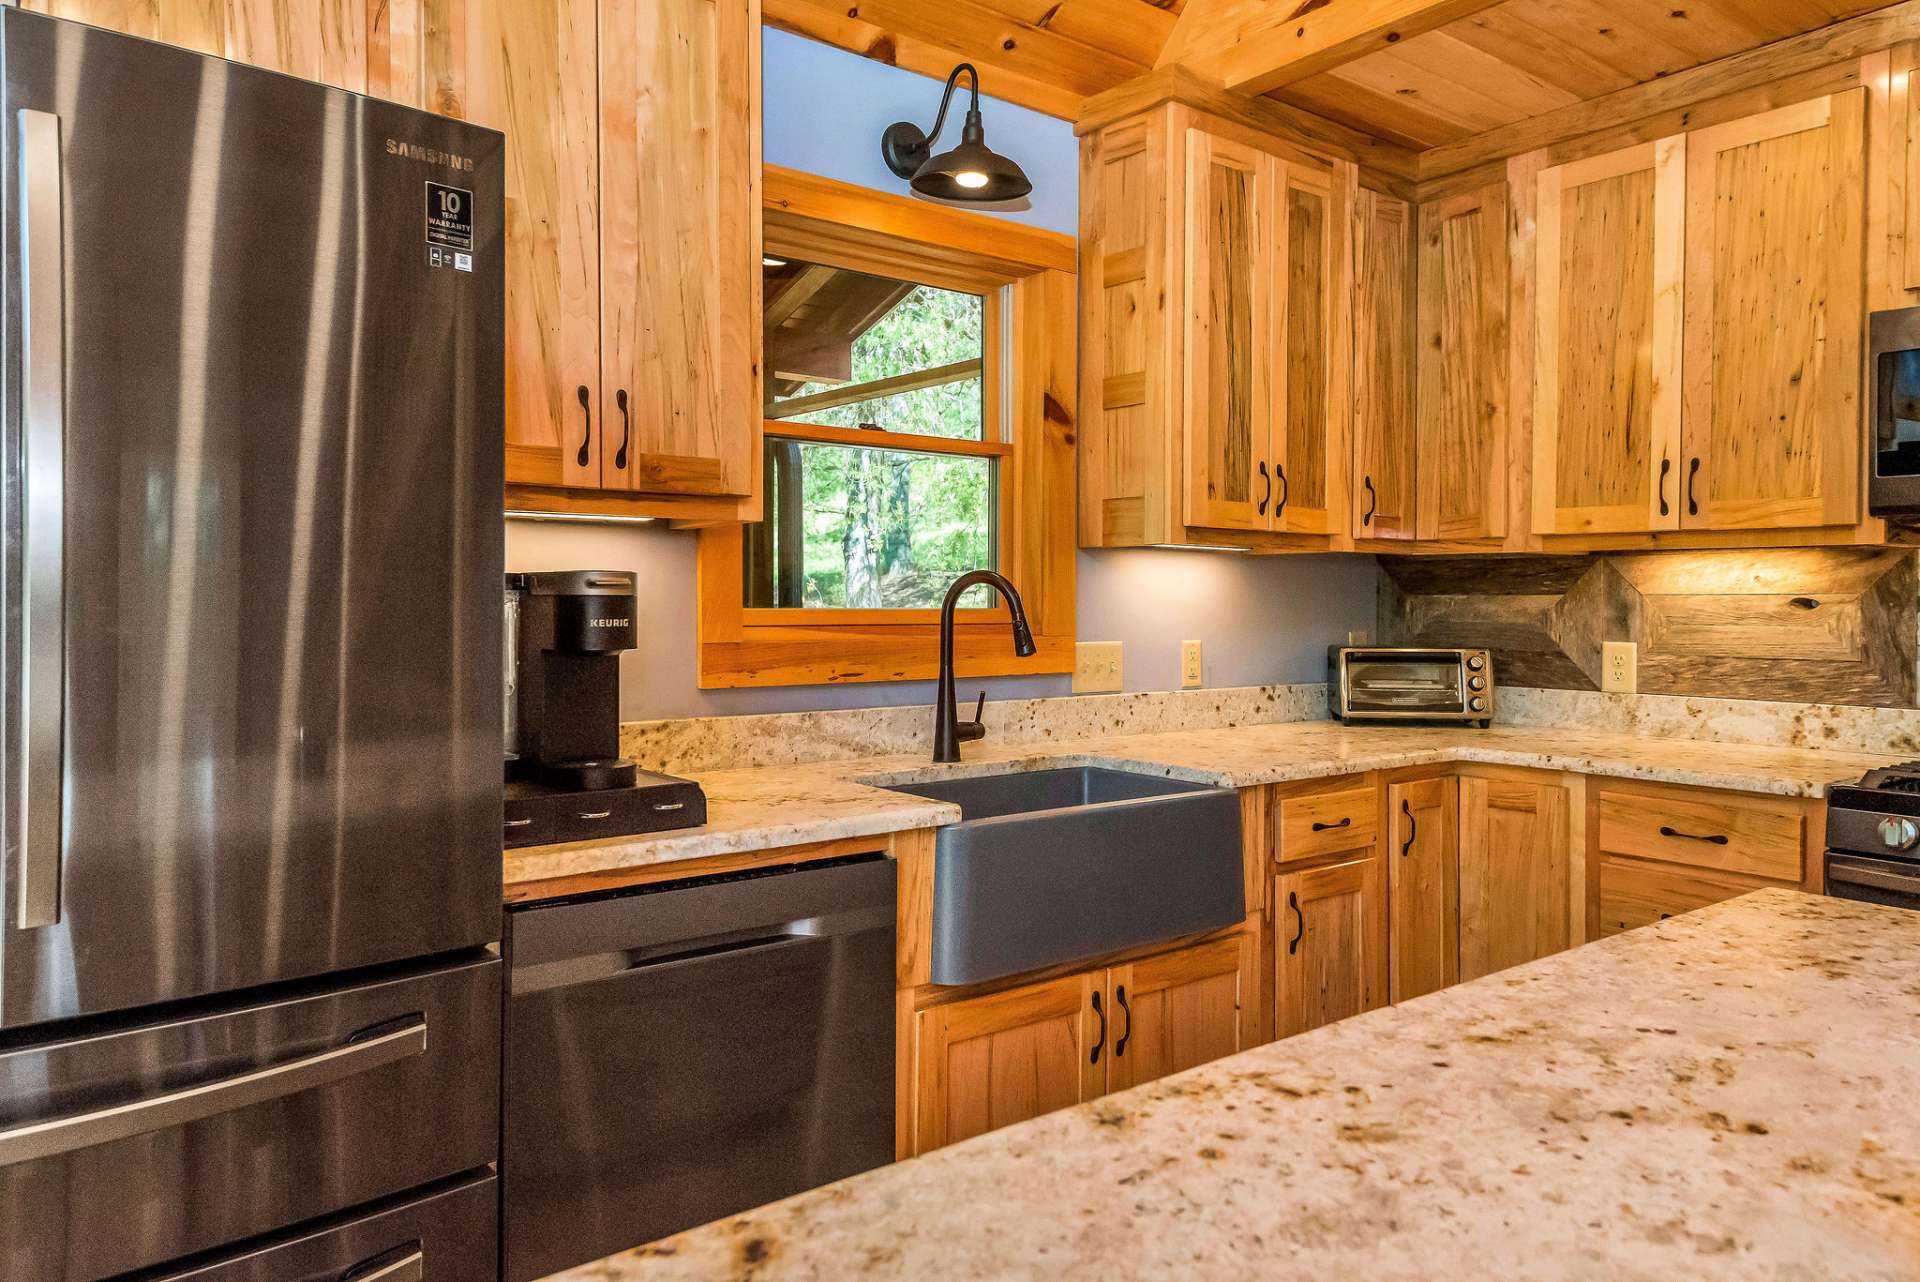 The granite countertops with warm tones speckled throughout complement the wormy maple cabinets giving a harmonious blend of natural elements.